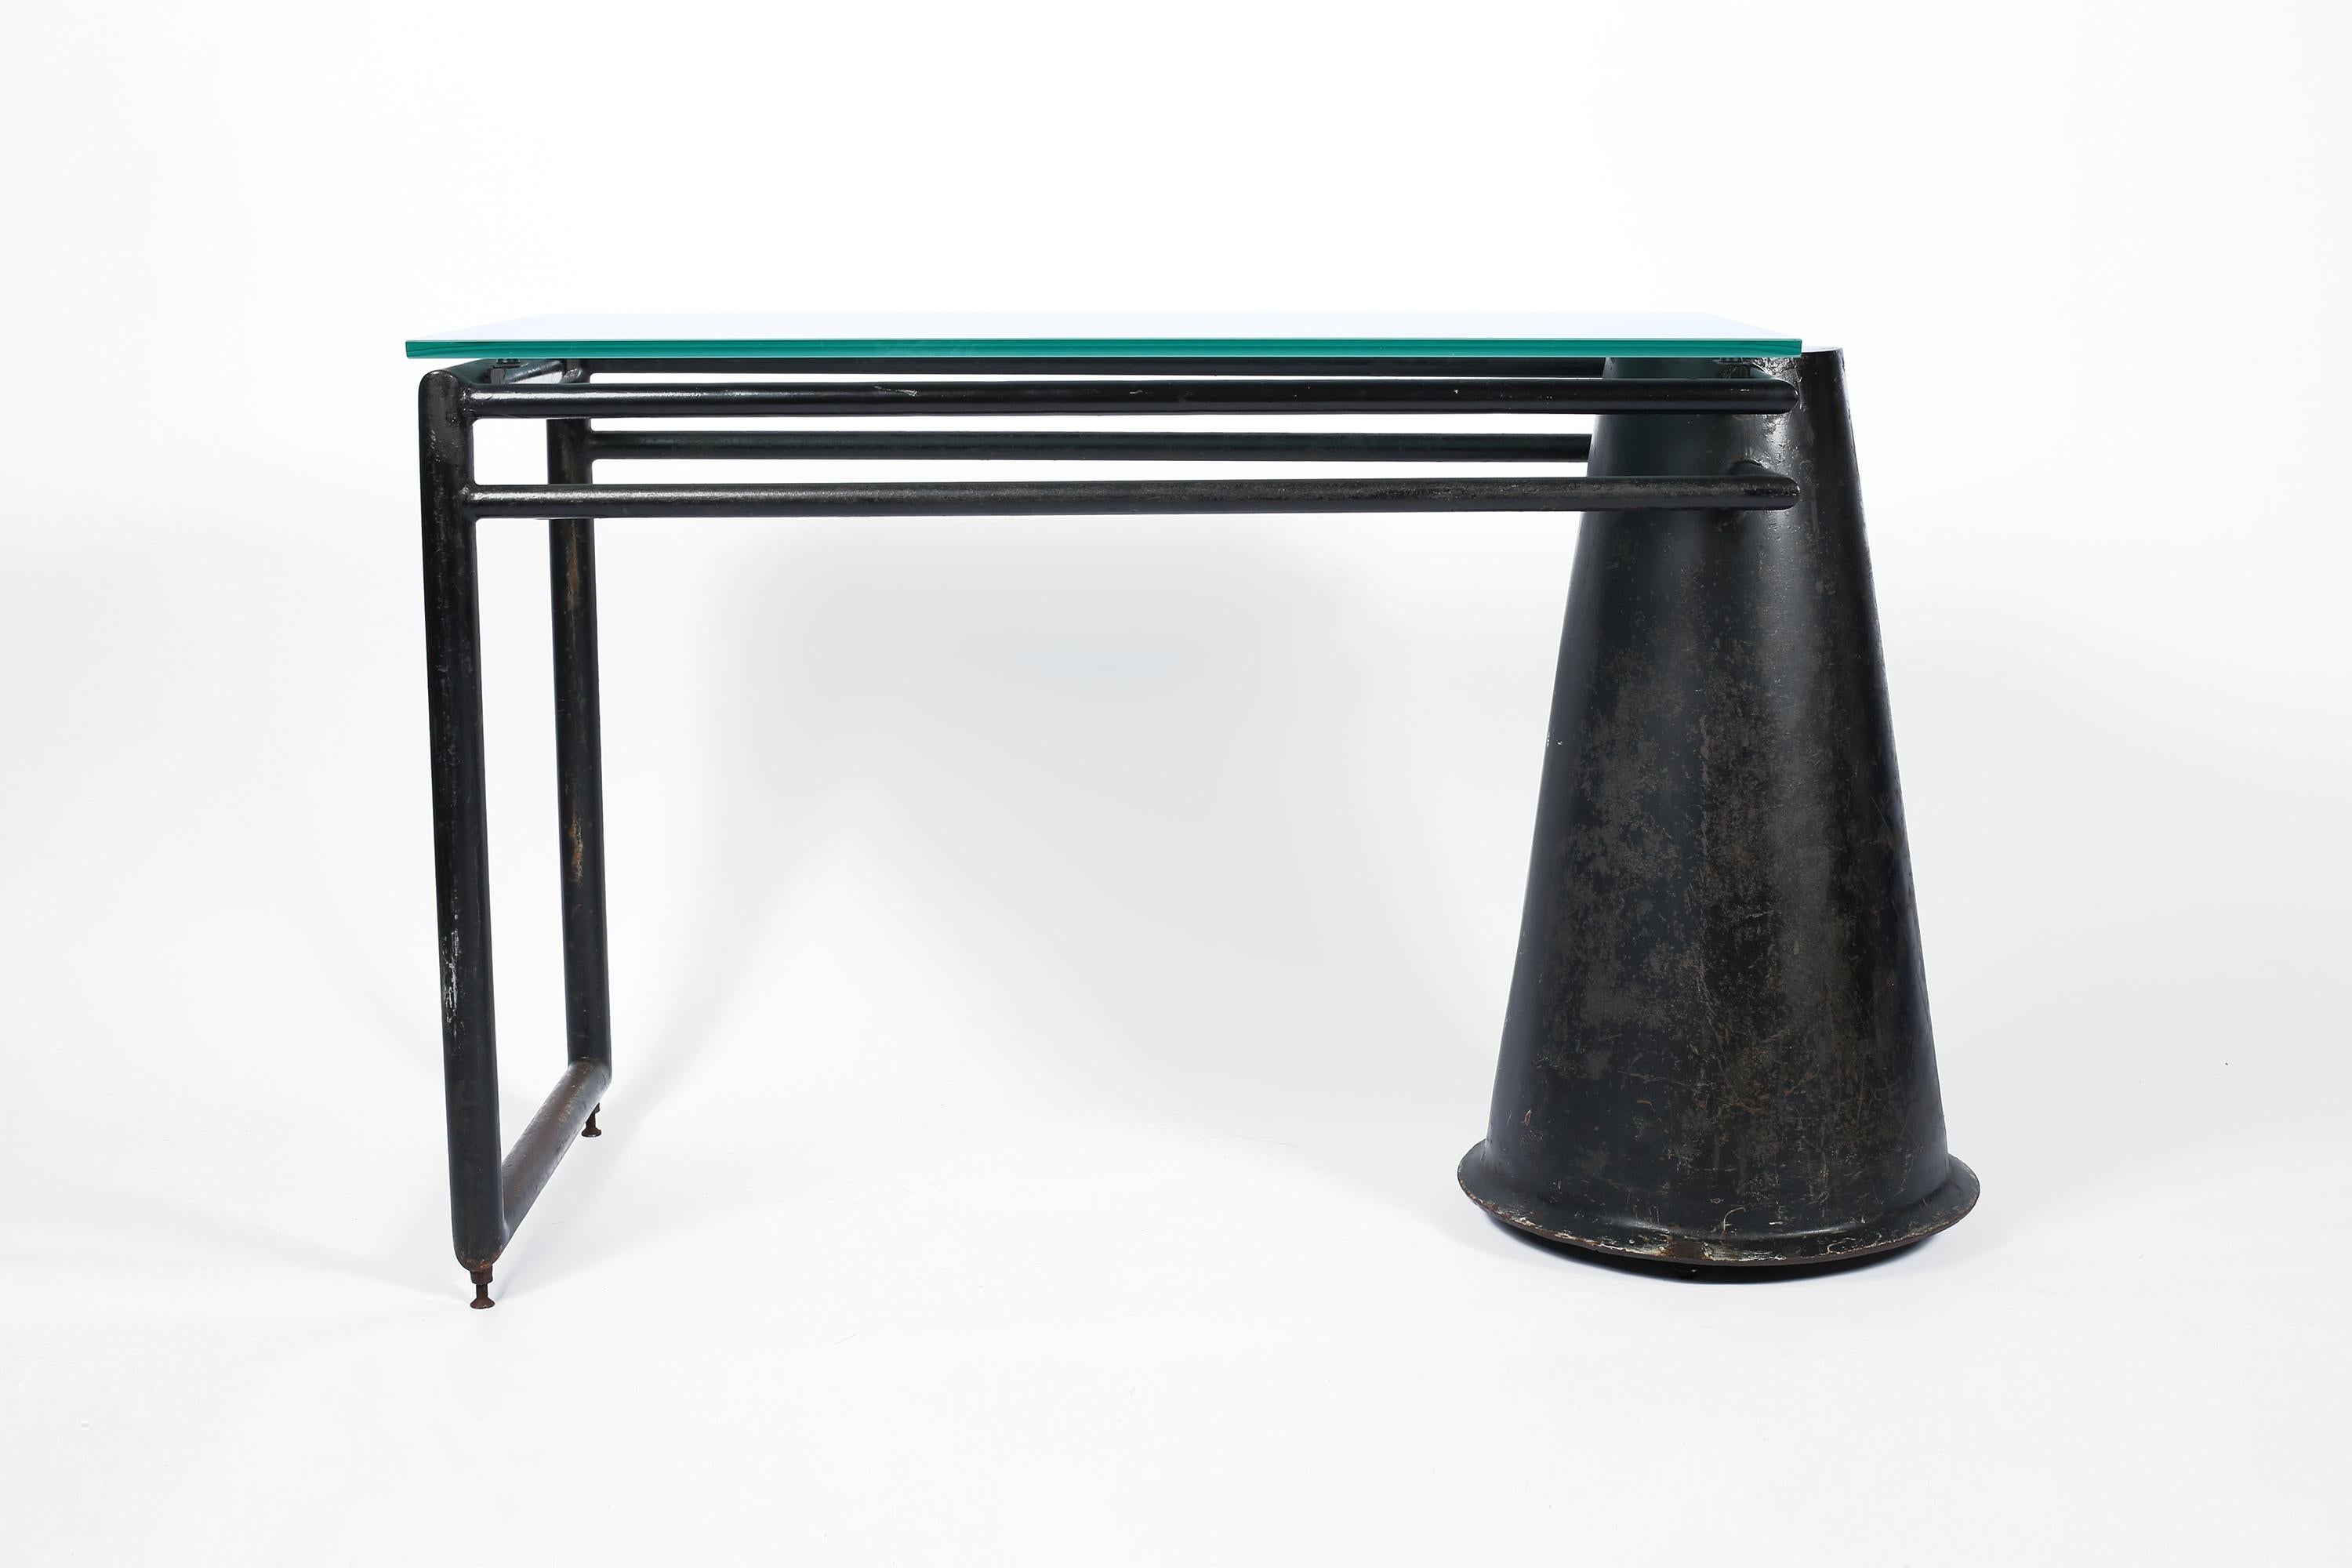 Modernist Steel and Glass Desk, French Early-Mid 20th Century In Good Condition For Sale In London, GB